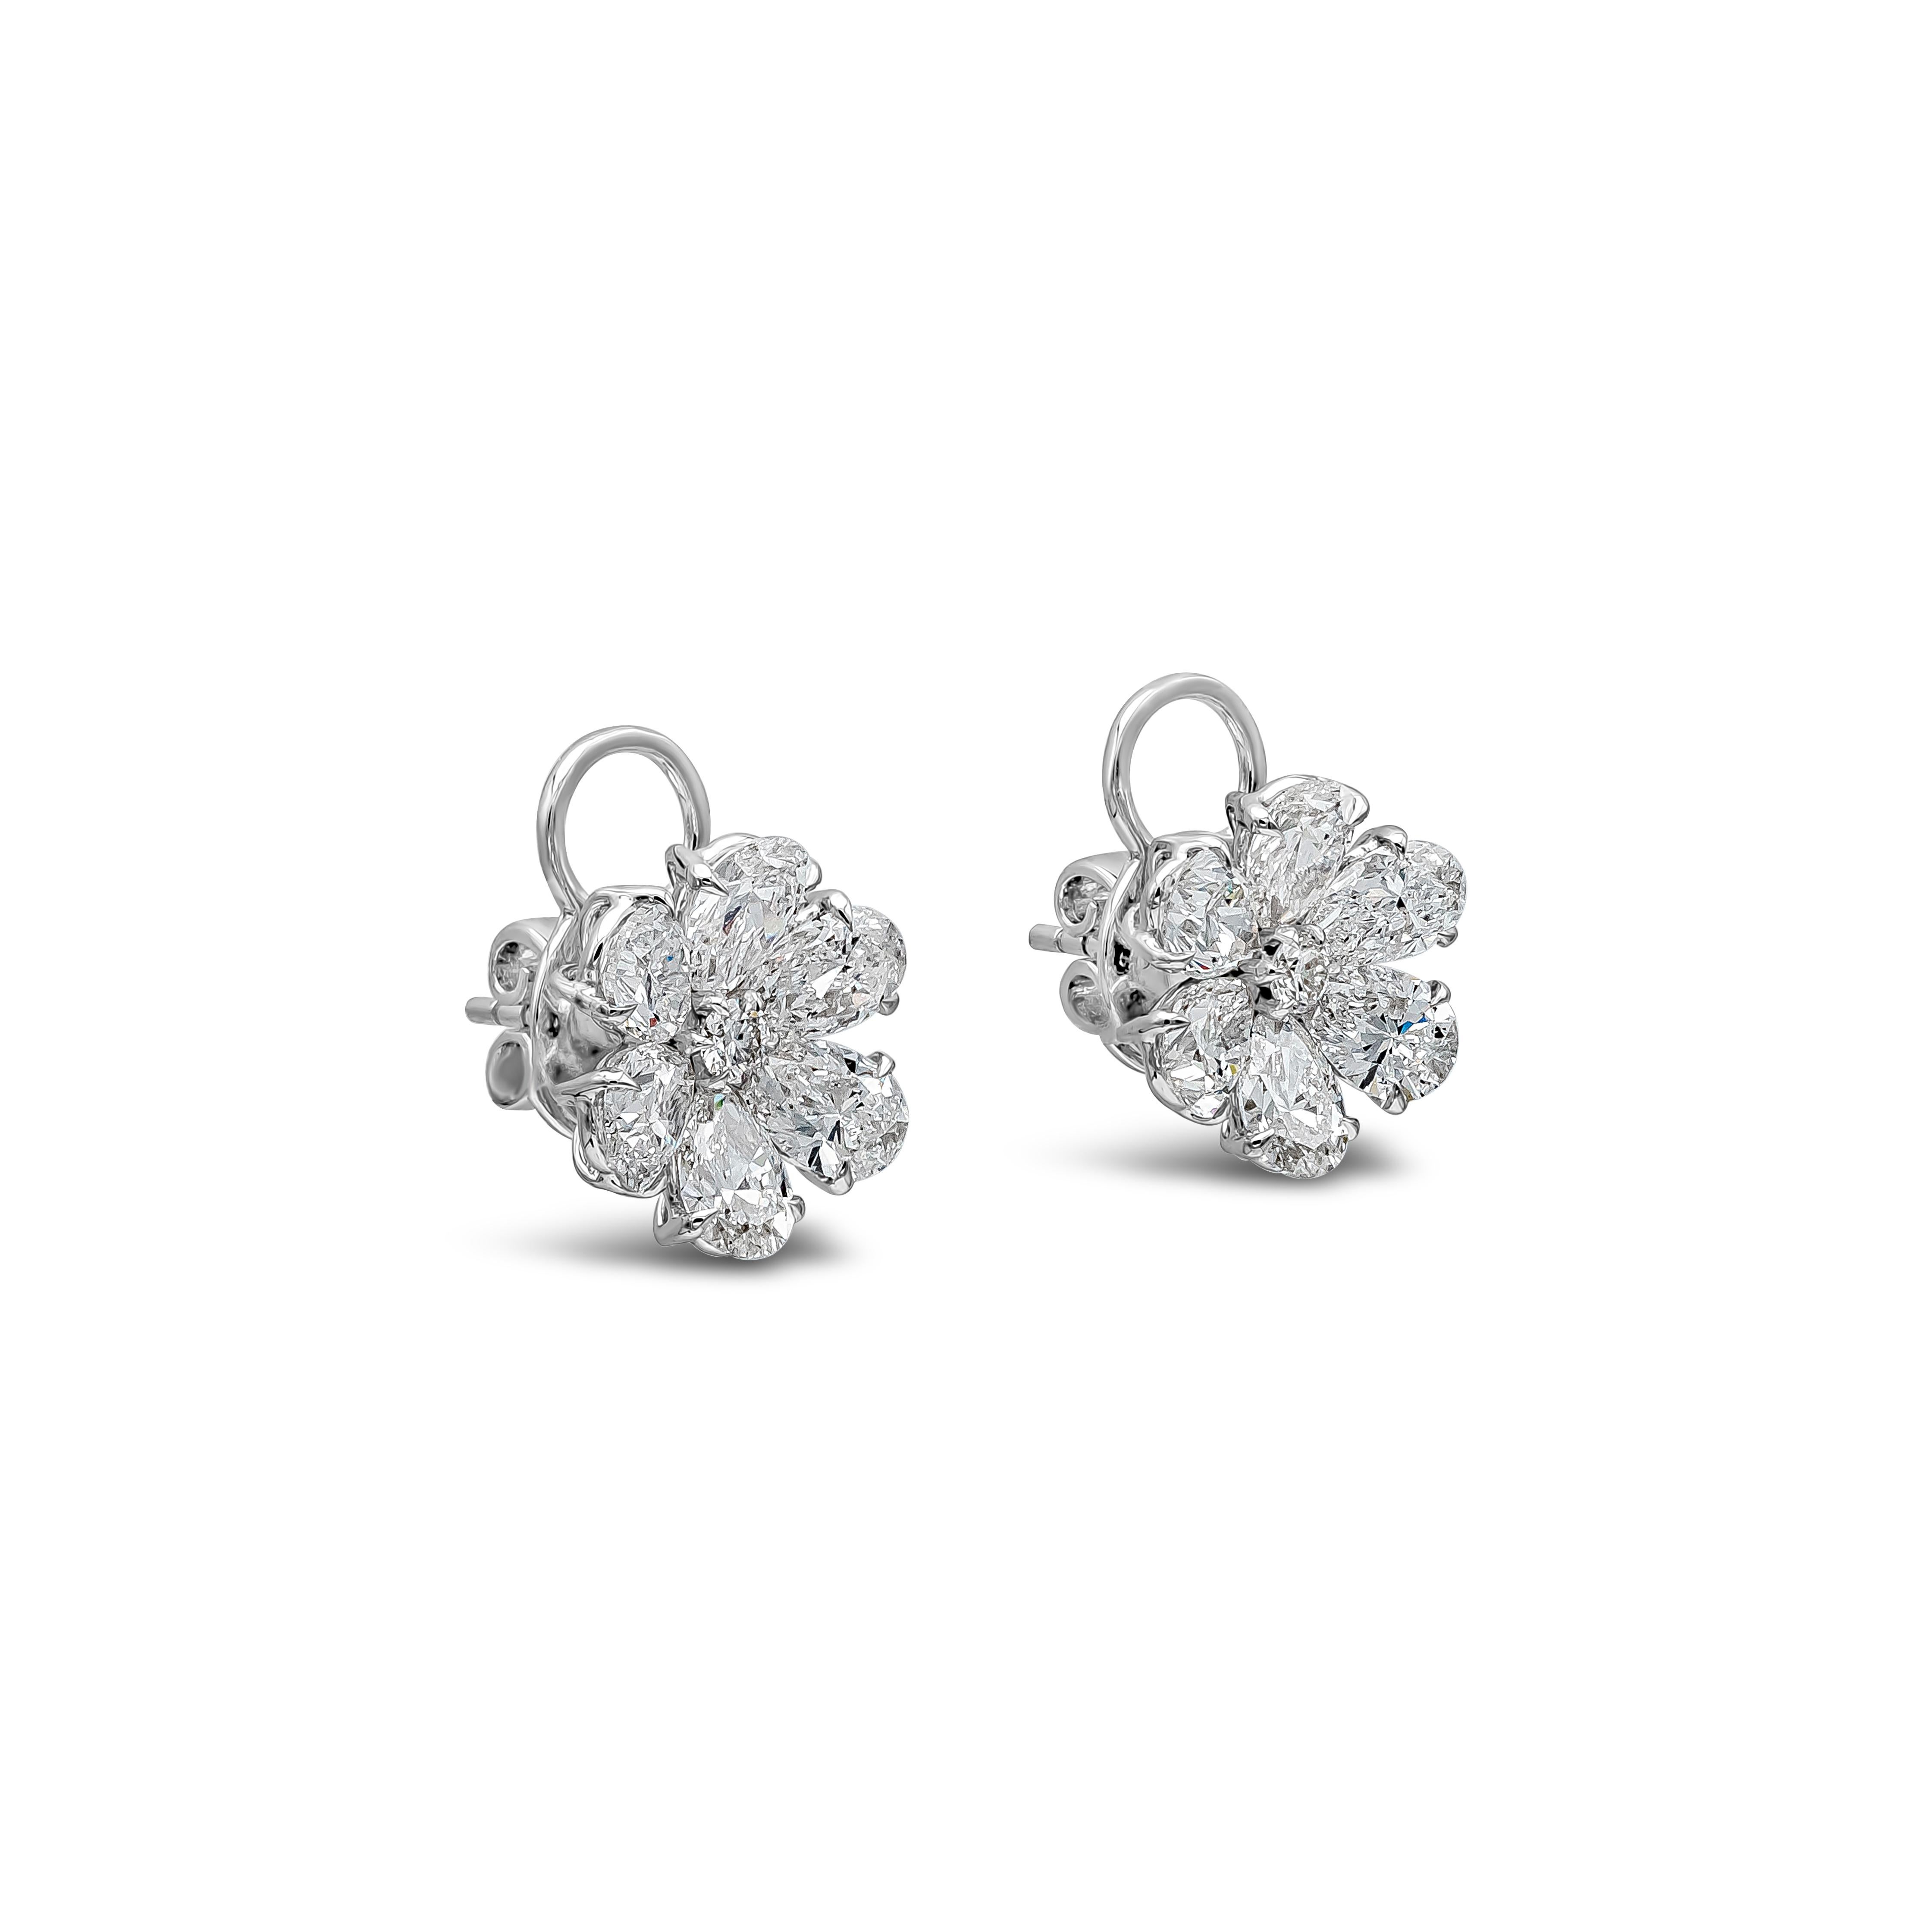 A simple yet unique piece of stud earrings showcasing 0.20 carats total brilliant round cut diamonds, D-E color, VS in clarity. Surrounded by a clusters of pear shape diamonds arranged in a flower-motif design weighing 6.10 carats total and